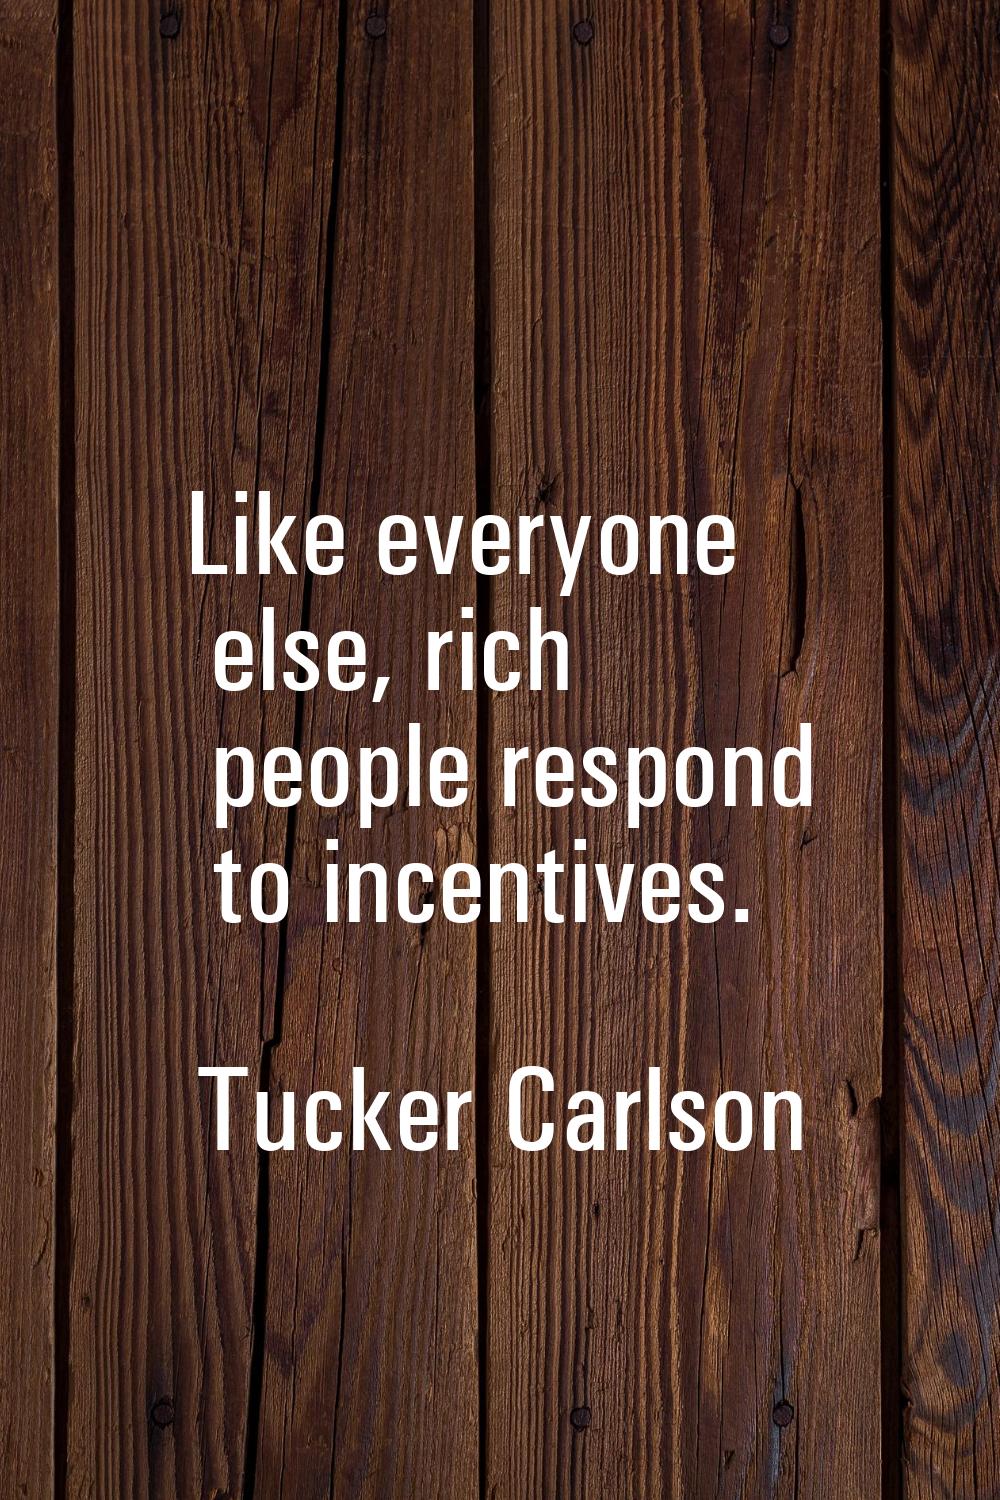 Like everyone else, rich people respond to incentives.